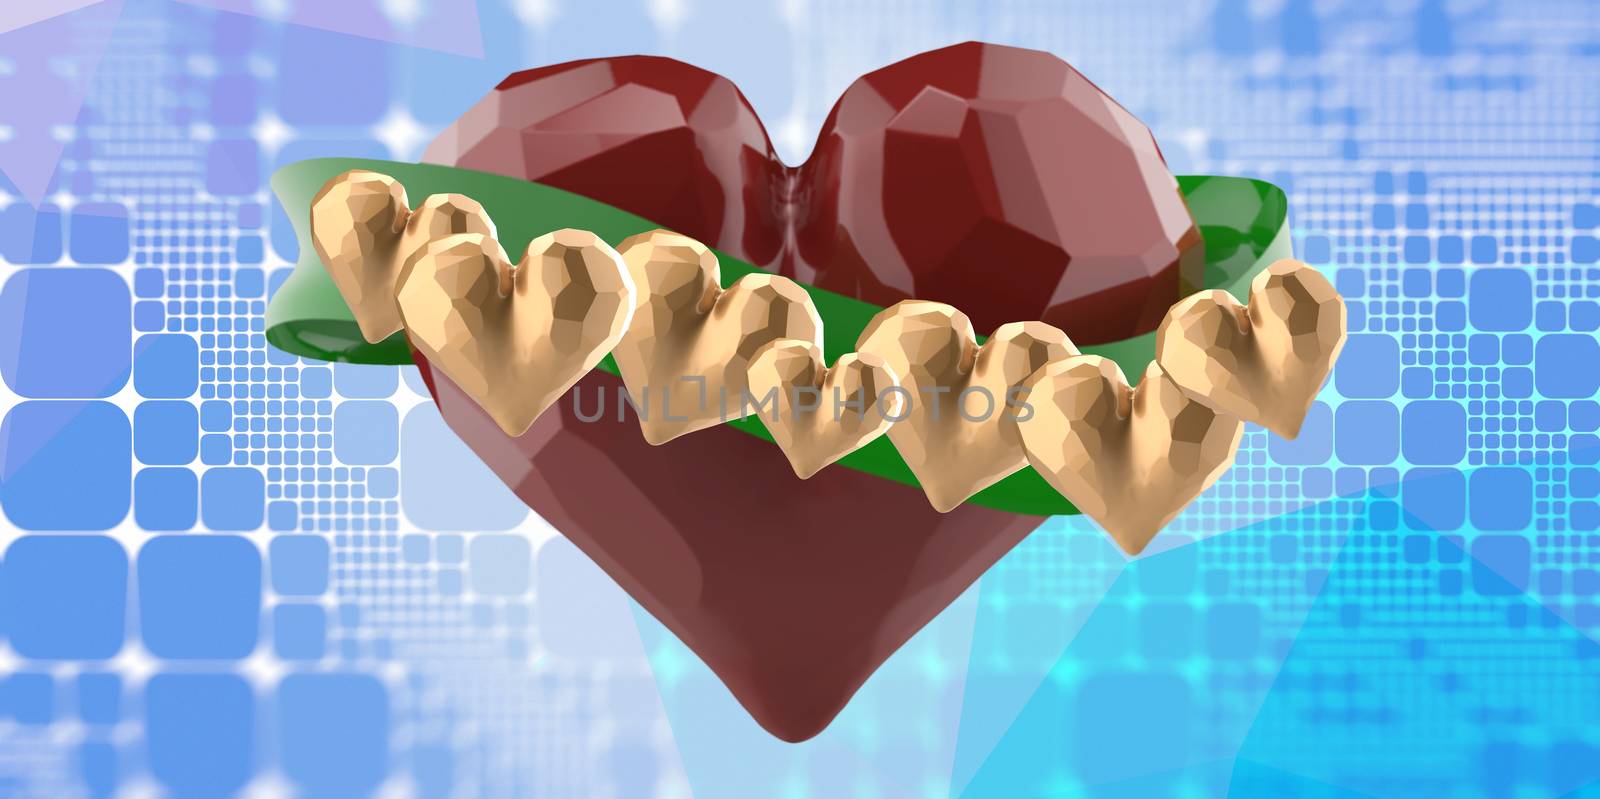 Happy Valentine day Flying red chopped heart with green ribbon and gold hearts. On blue abstract square polygonal background. 3d illustration.